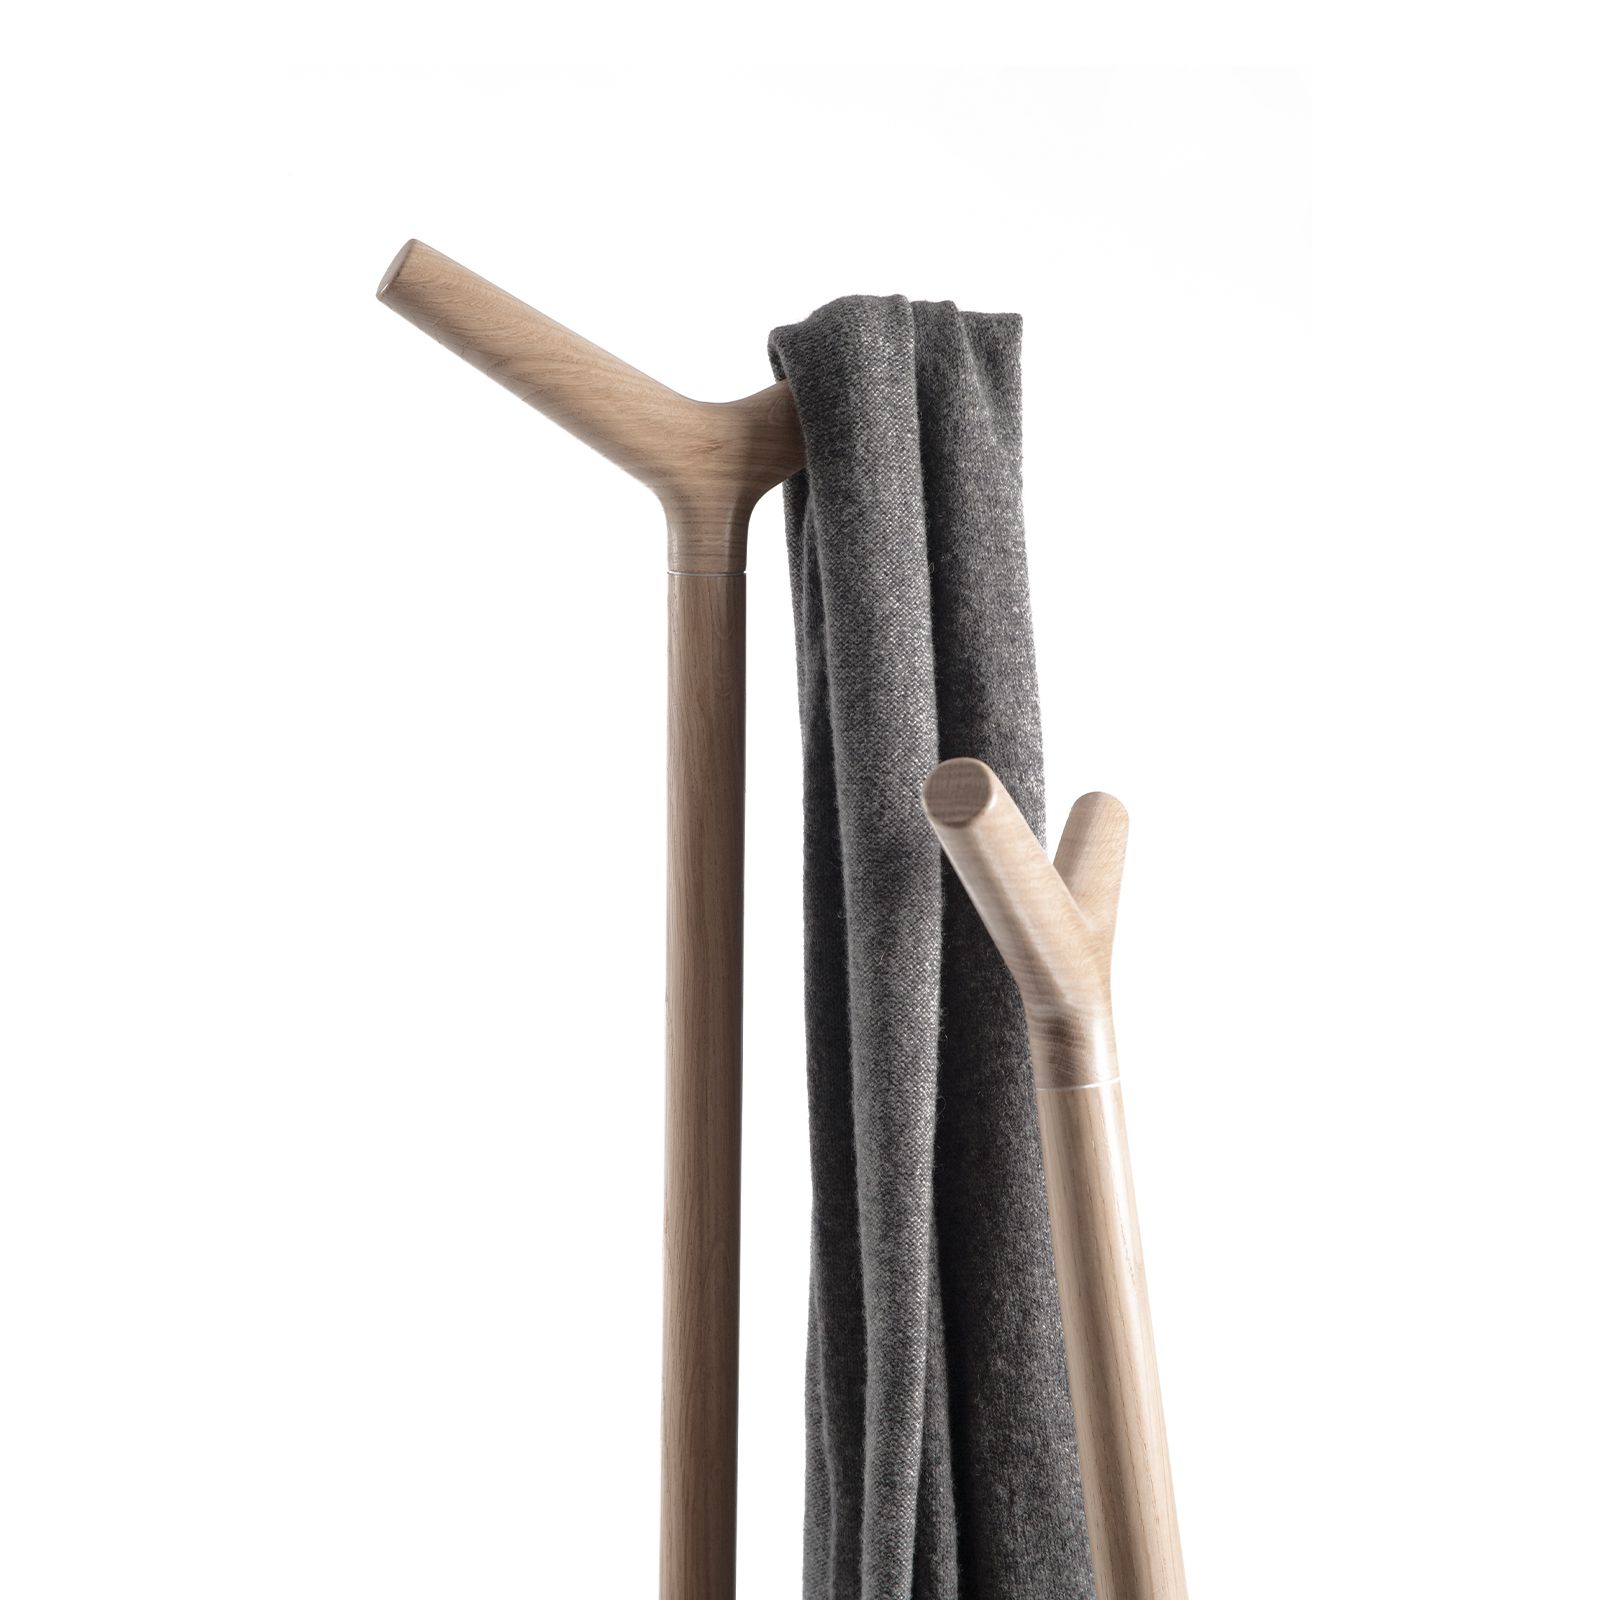 FORC COAT STAND